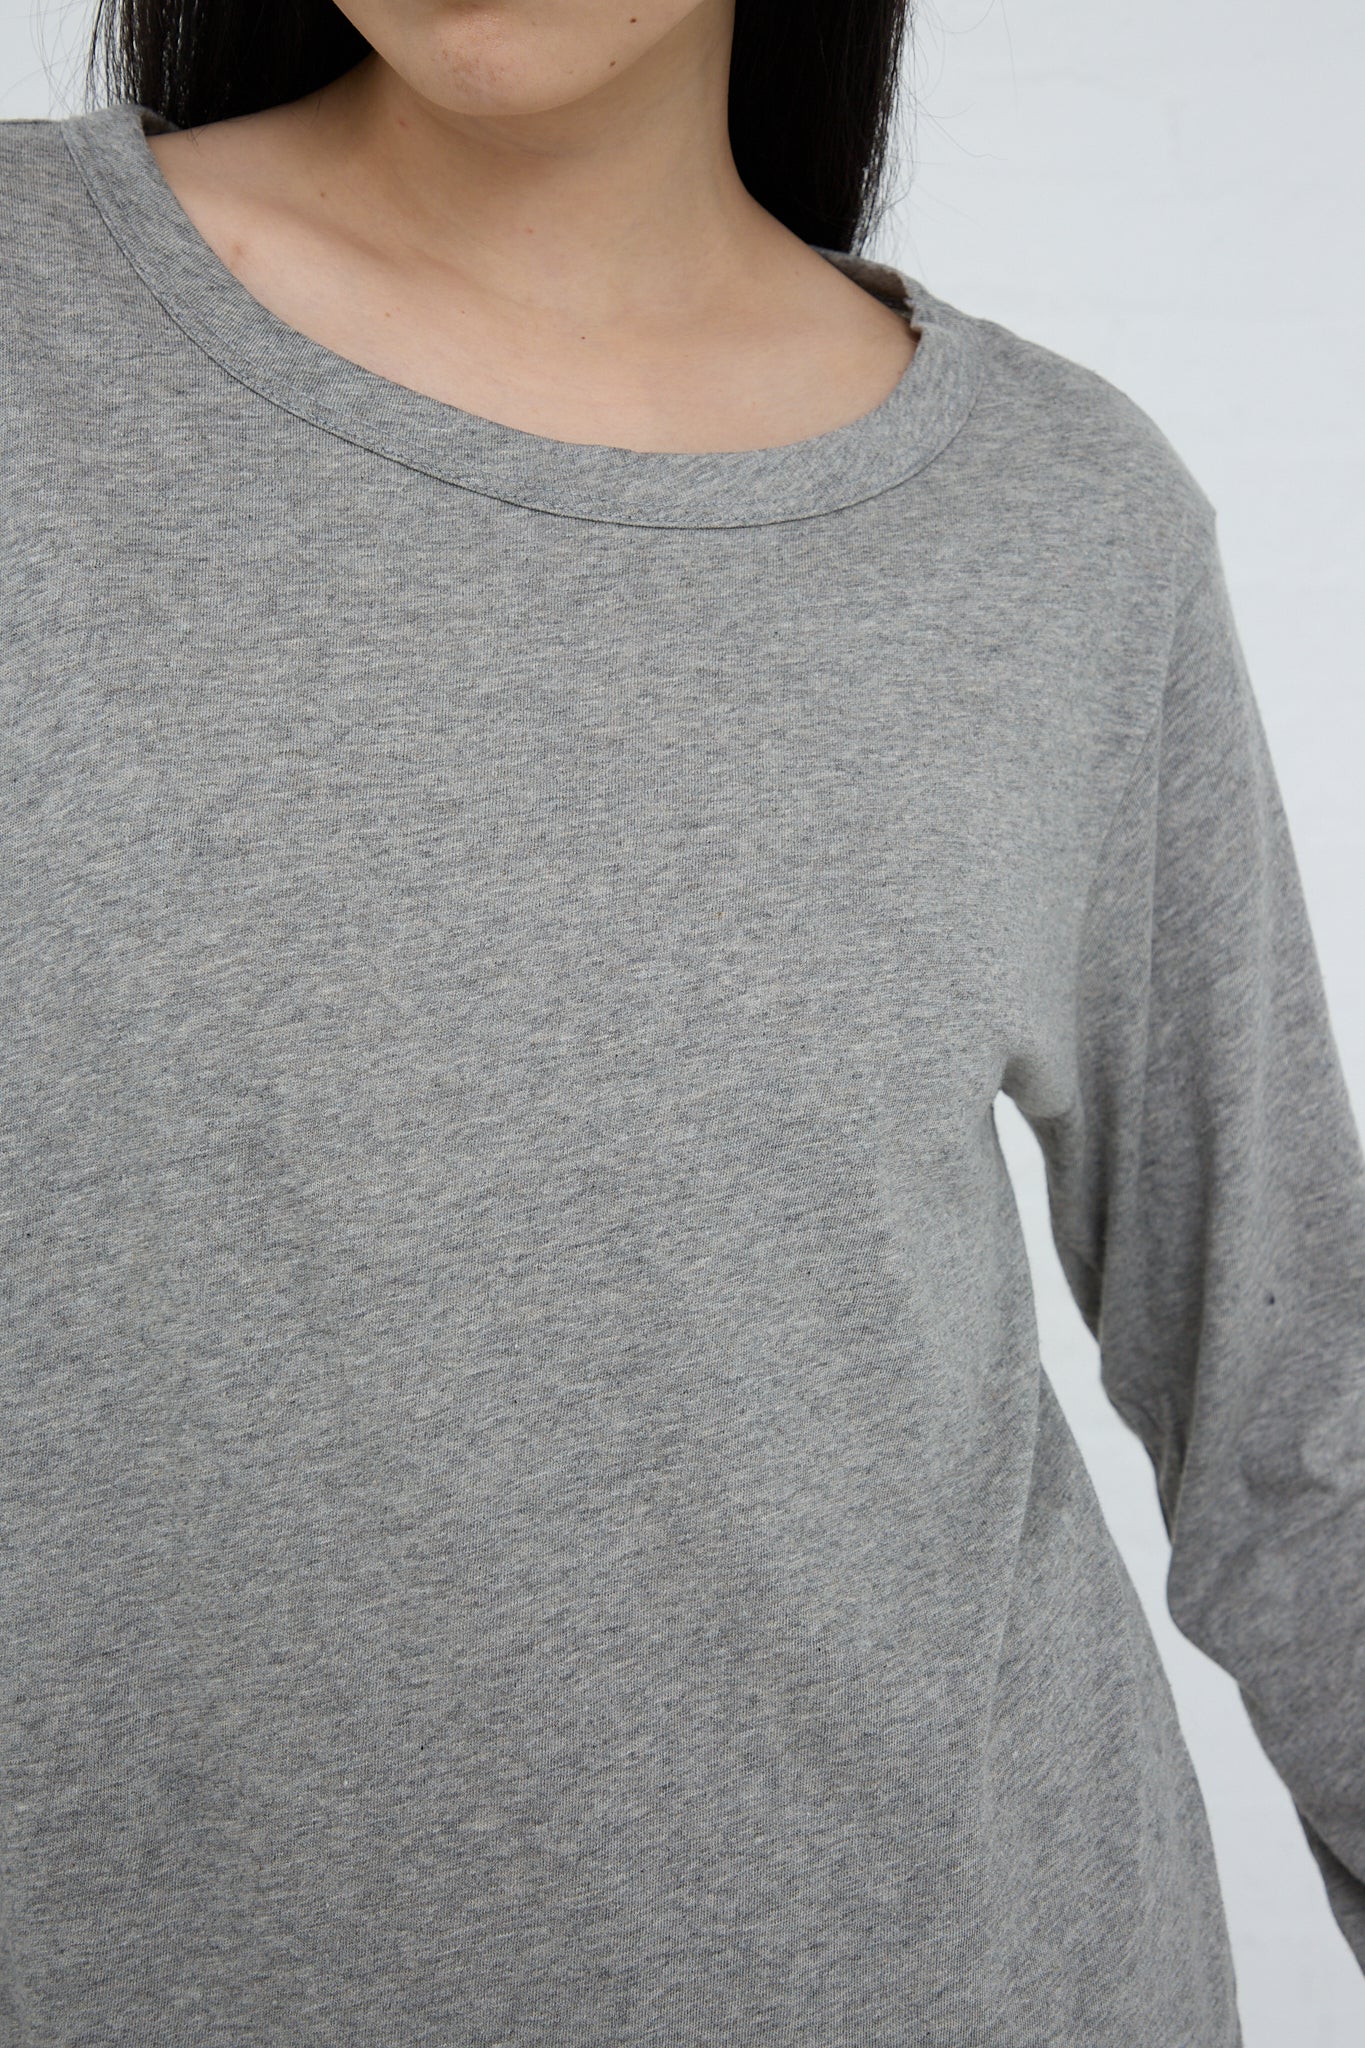 A woman wearing a relaxed fit, gray long-sleeved Ichi Cotton Knit Pullover. Front view and up close.